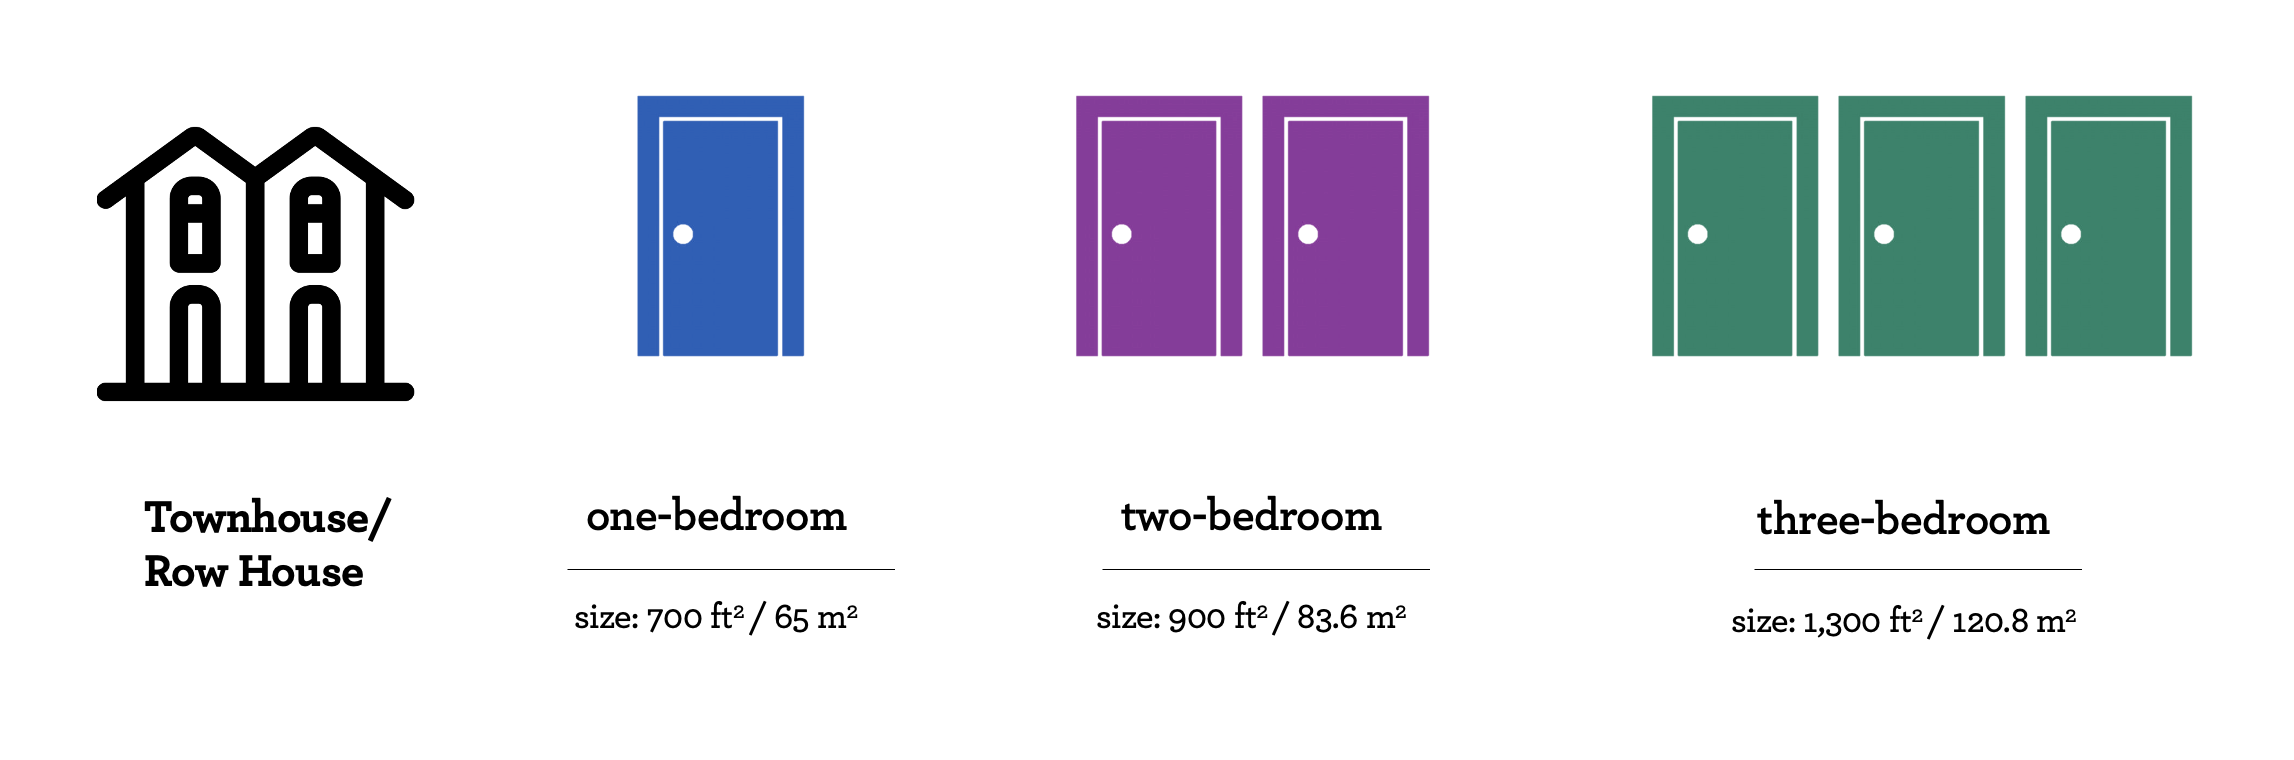 visual - townhouse sizes